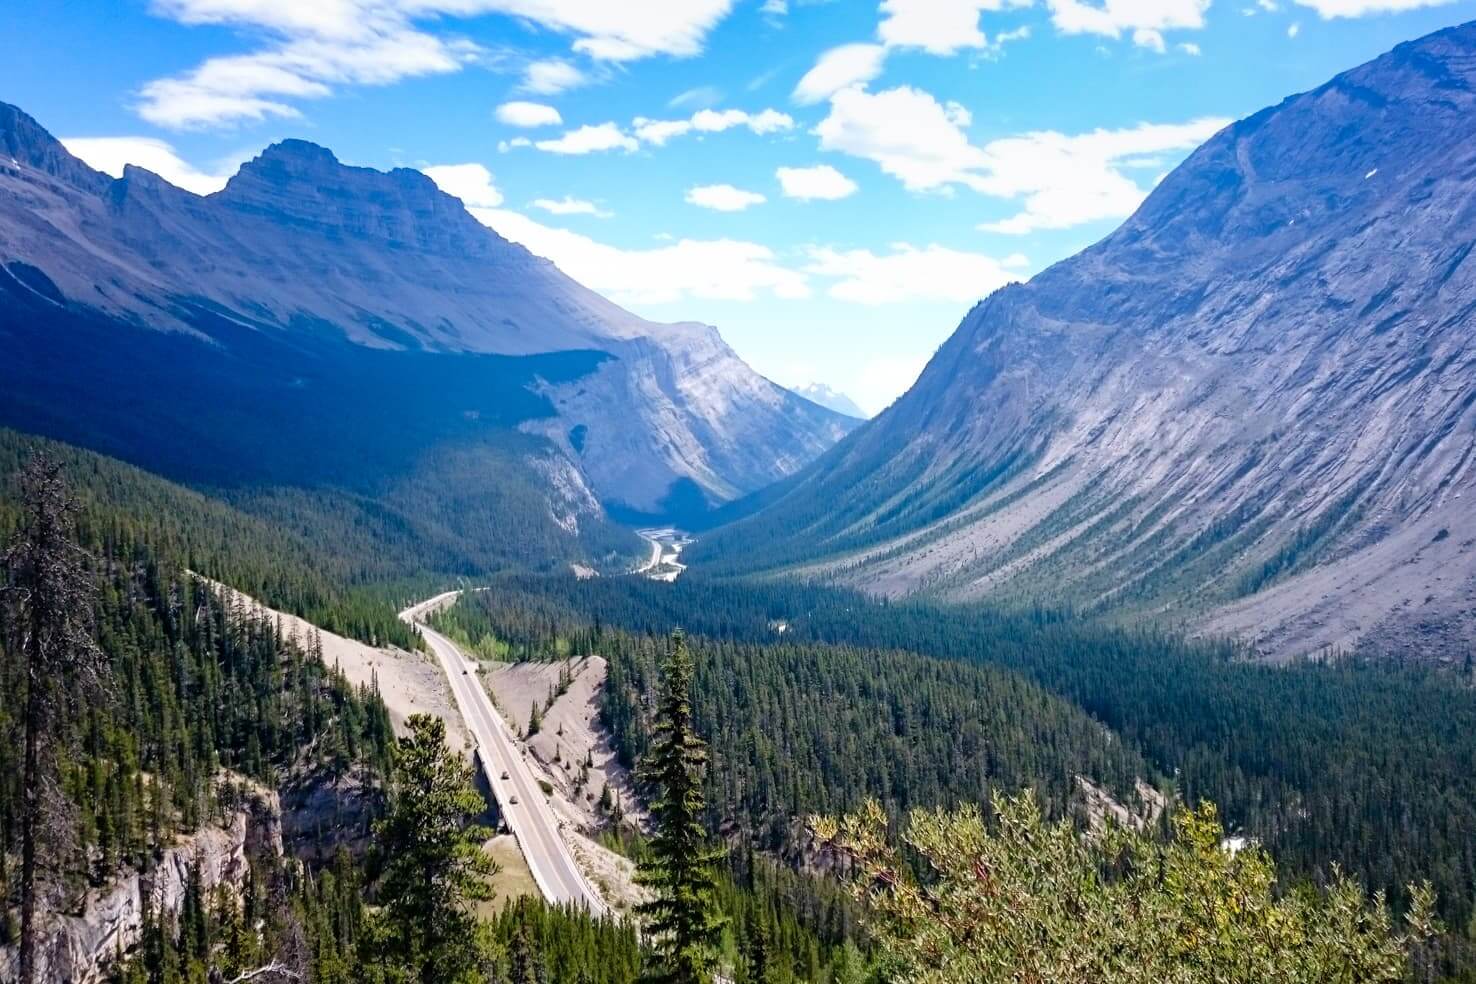 100 best things to do in Banff National Park, Canada - Drive Icefields Parkway